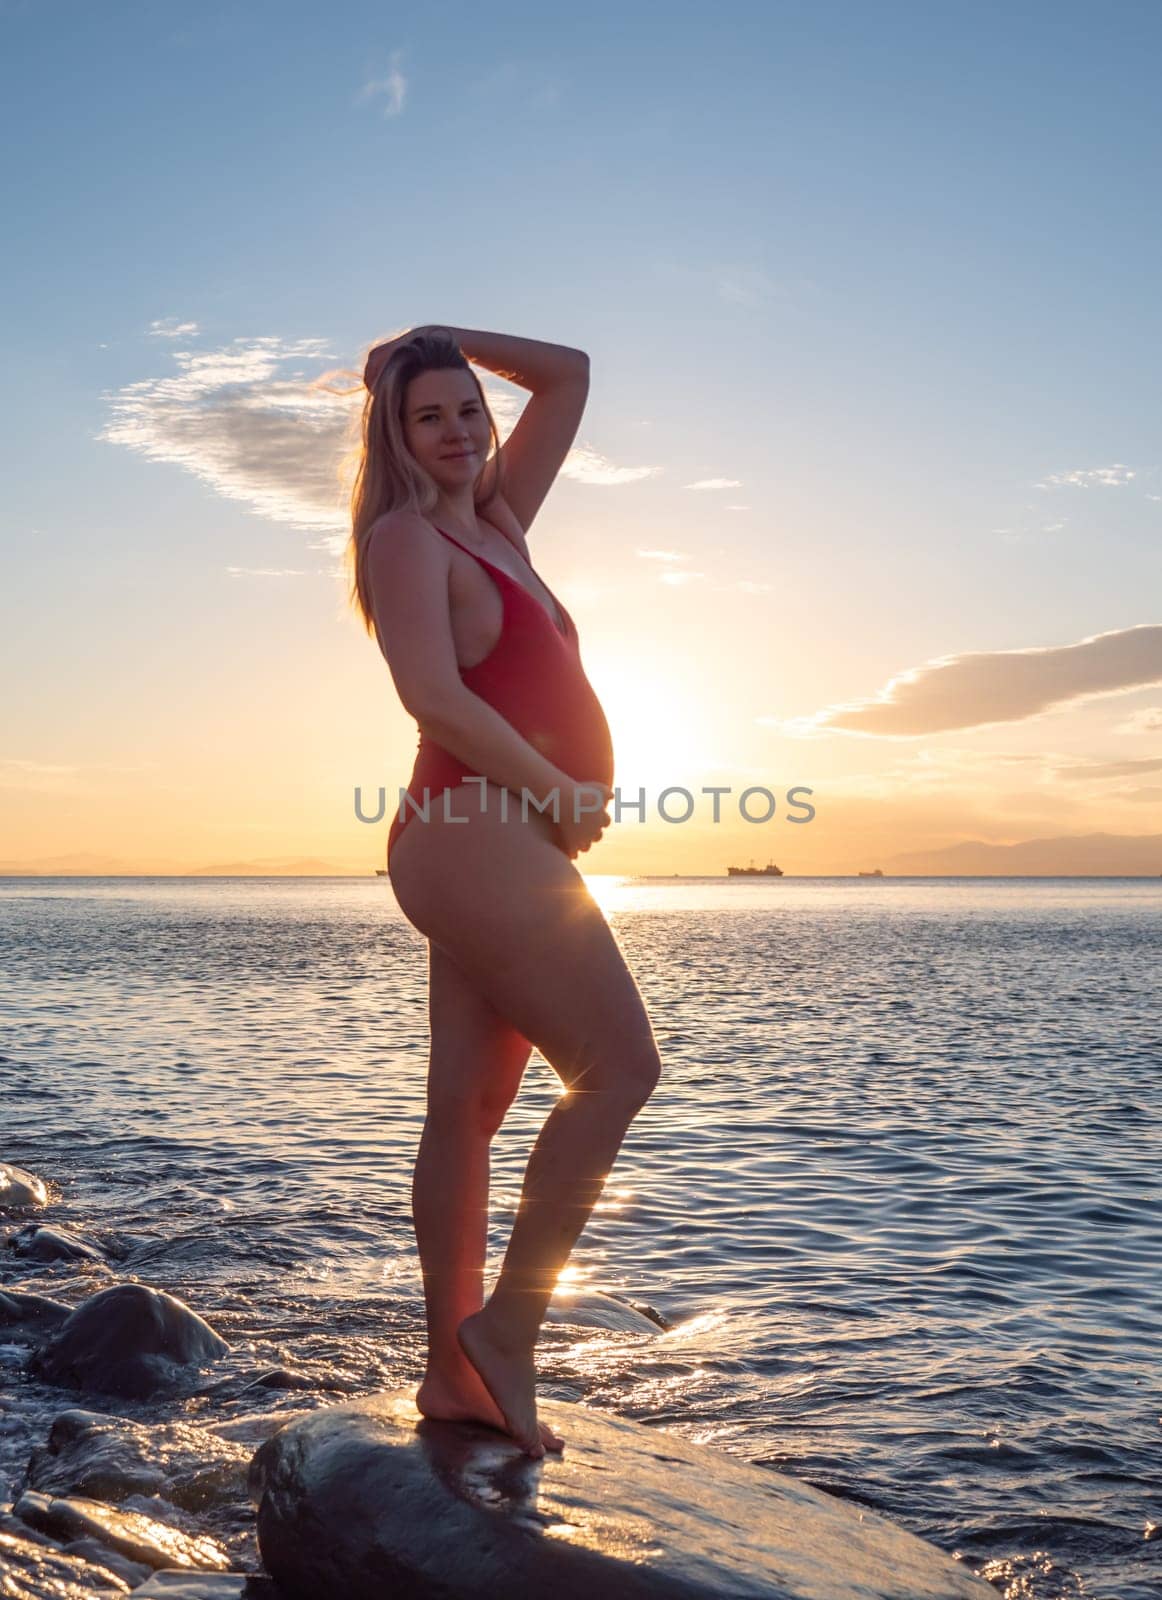 A pregnant woman stands on a rock by the seaside during sunrise, lovingly cradling her baby bump.